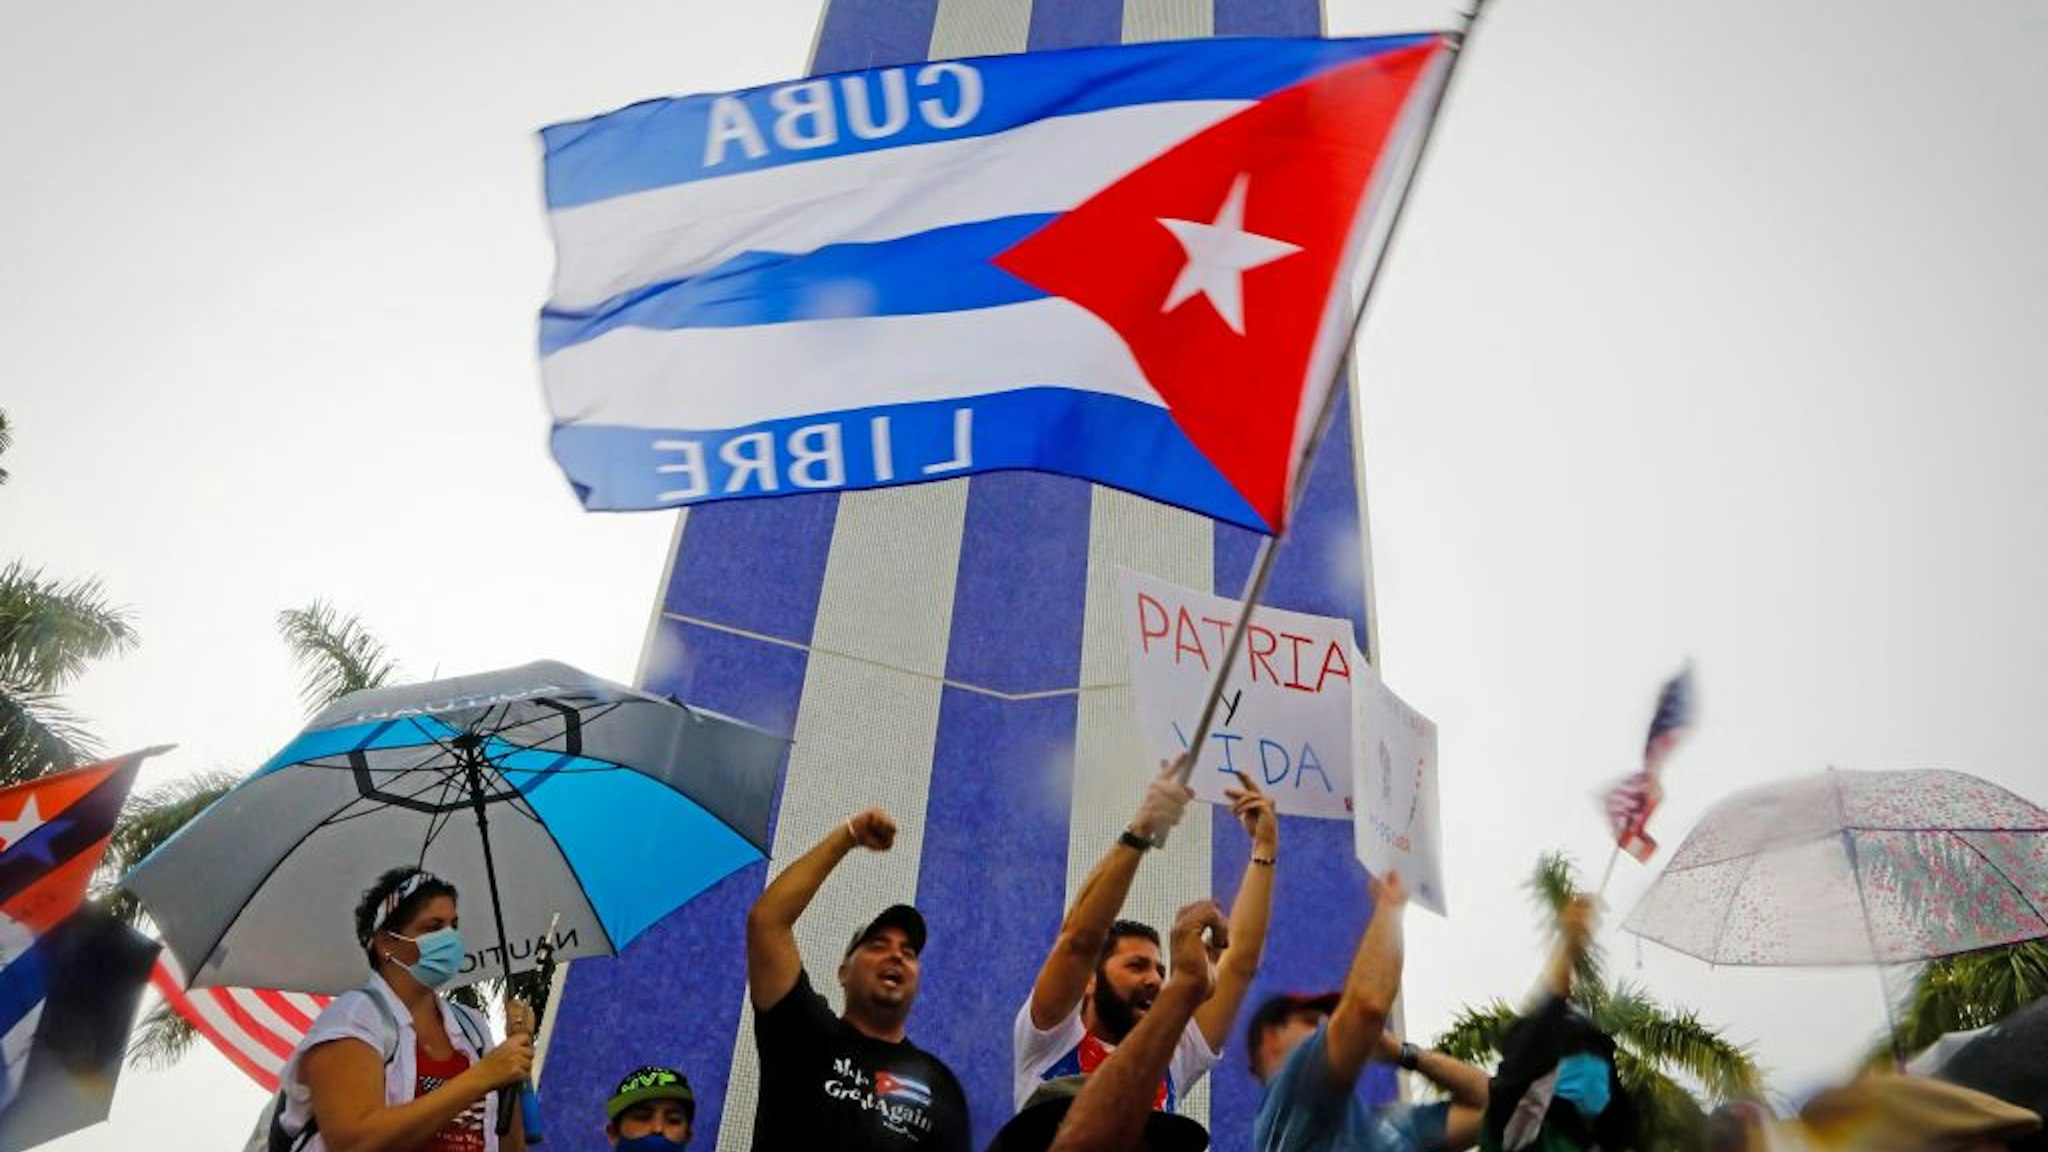 People demonstrate waving Cuban flags during a protest against the Cuban government at Tamiami Park in Miami, on July 13, 2021. - Washington warned Haitians and Cubans against trying to flee to the United States as they endure domestic unrest, saying the trip is dangerous and they would be repatriated. (Photo by Eva Marie UZCATEGUI / AFP) (Photo by EVA MARIE UZCATEGUI/AFP via Getty Images)